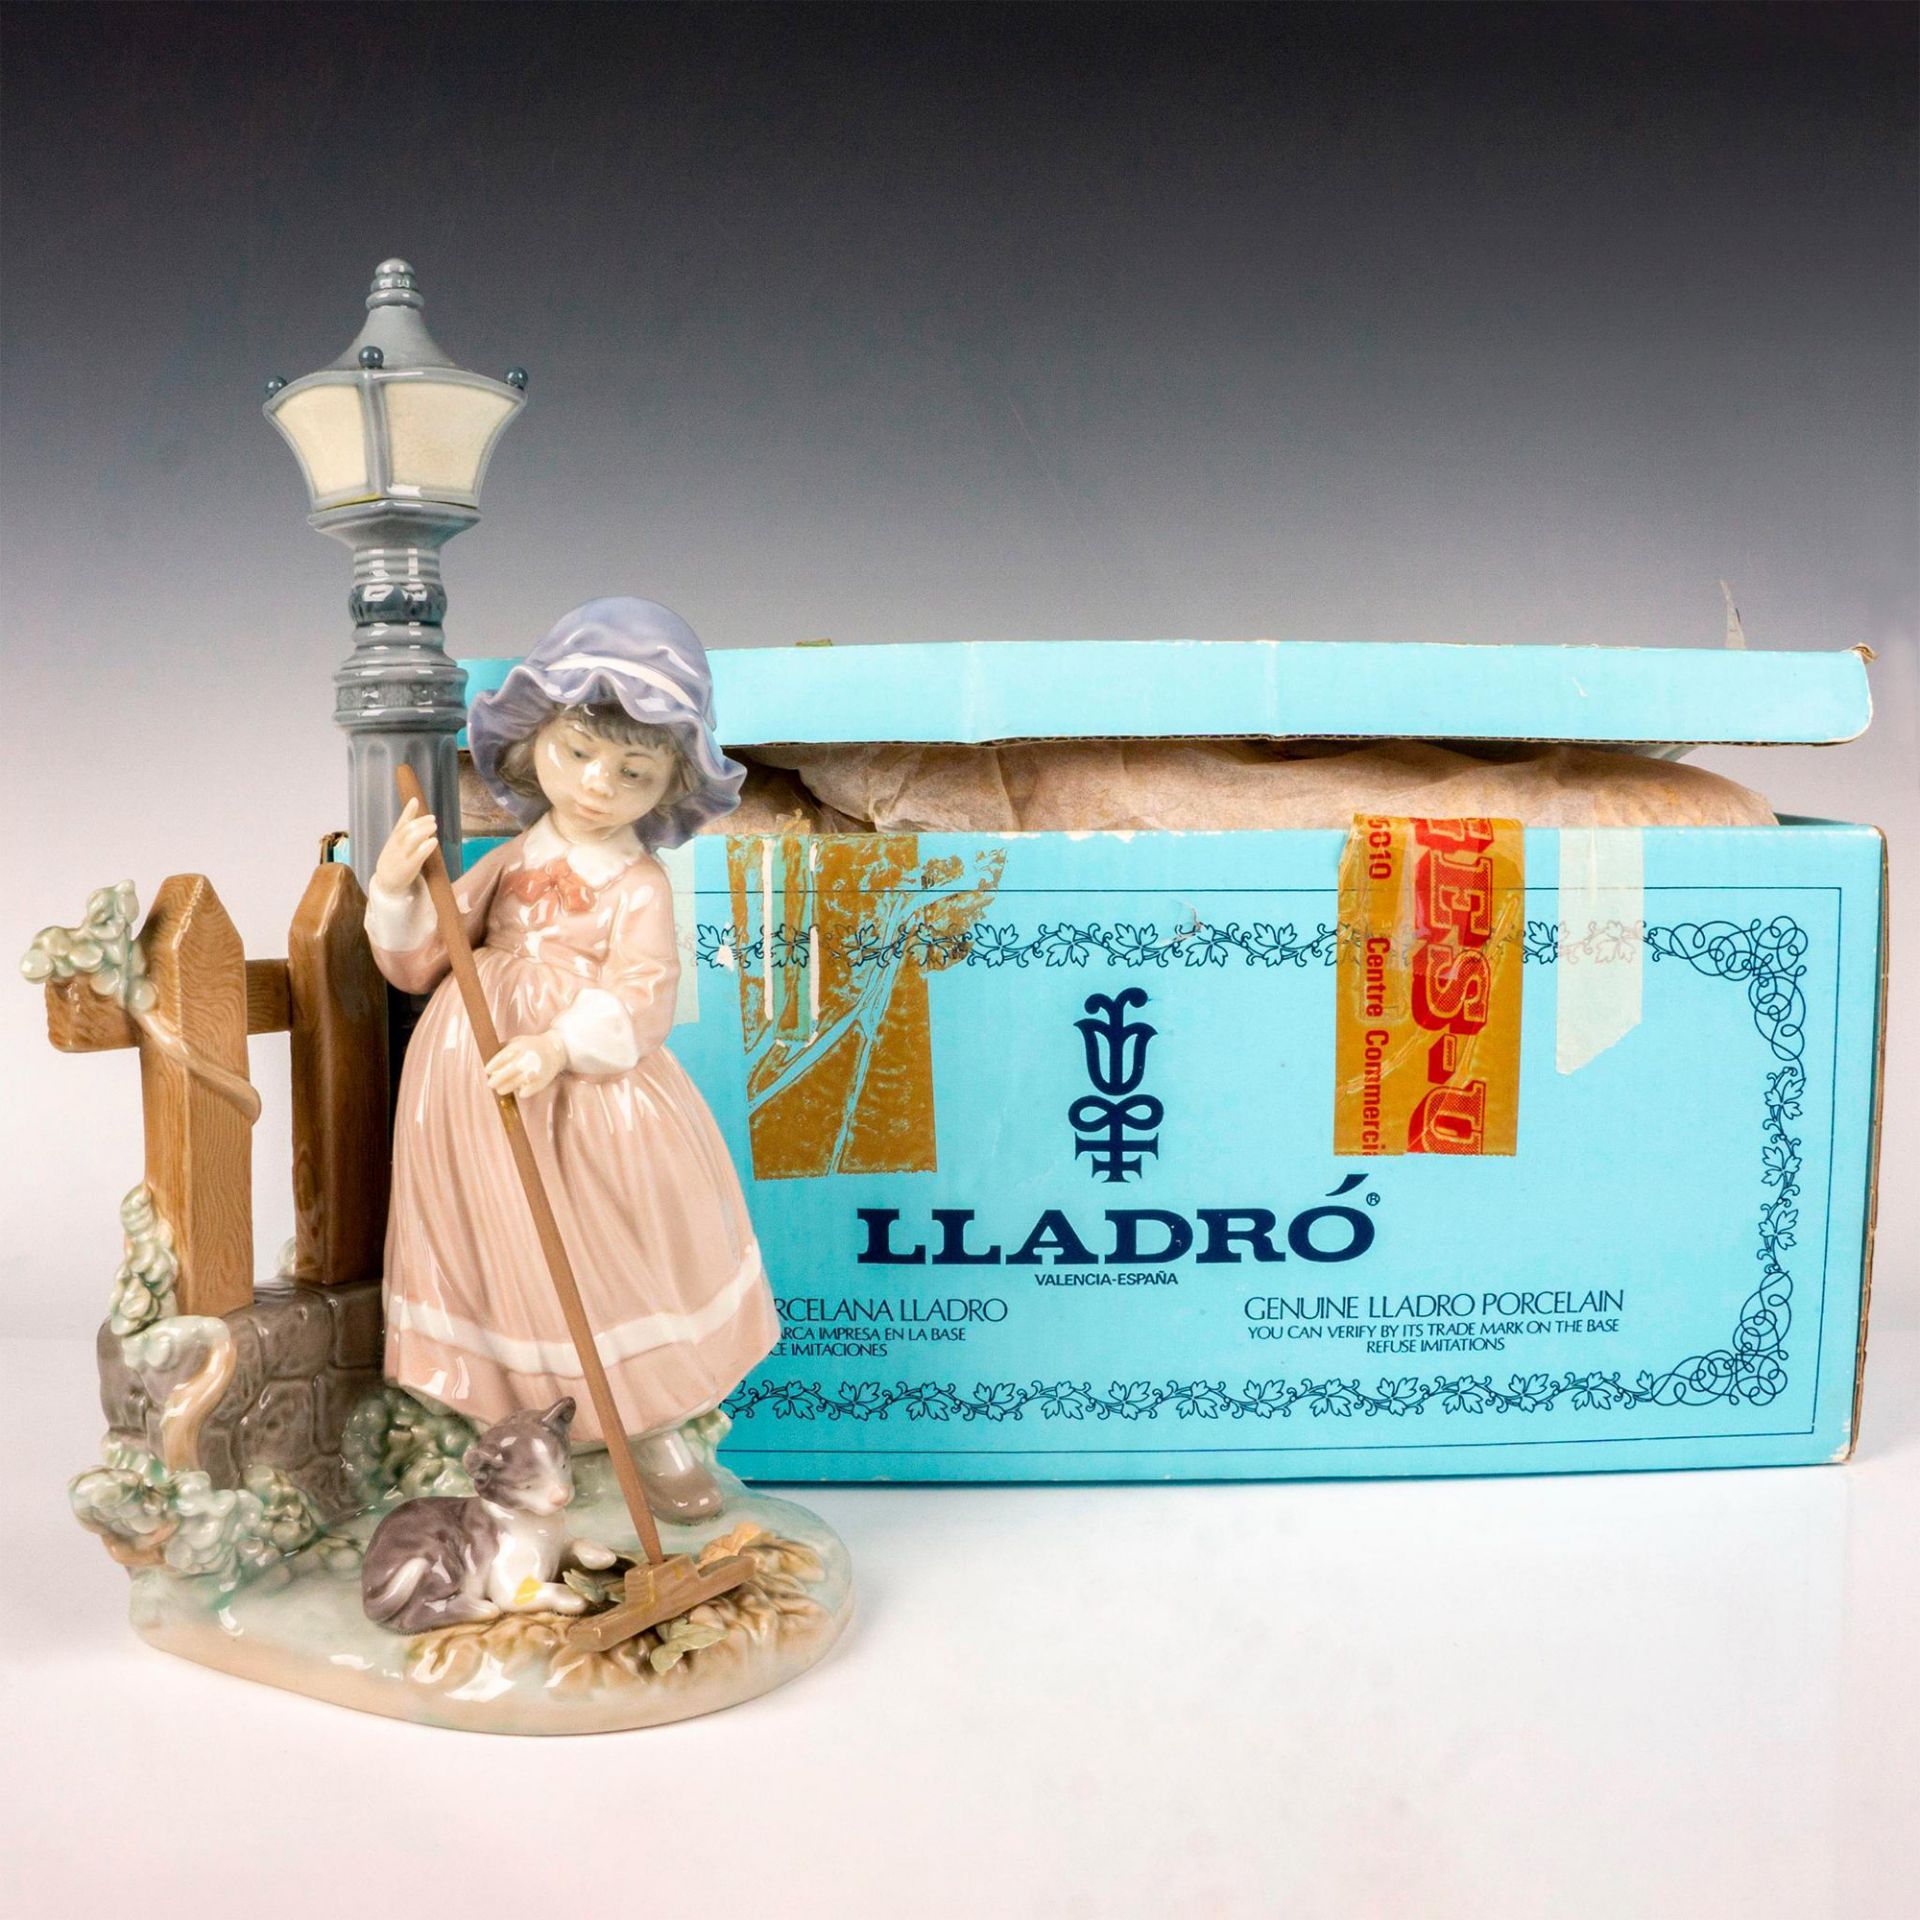 Fall Clean Up 1005286 - Lladro Porcelain Figurine - Image 4 of 4